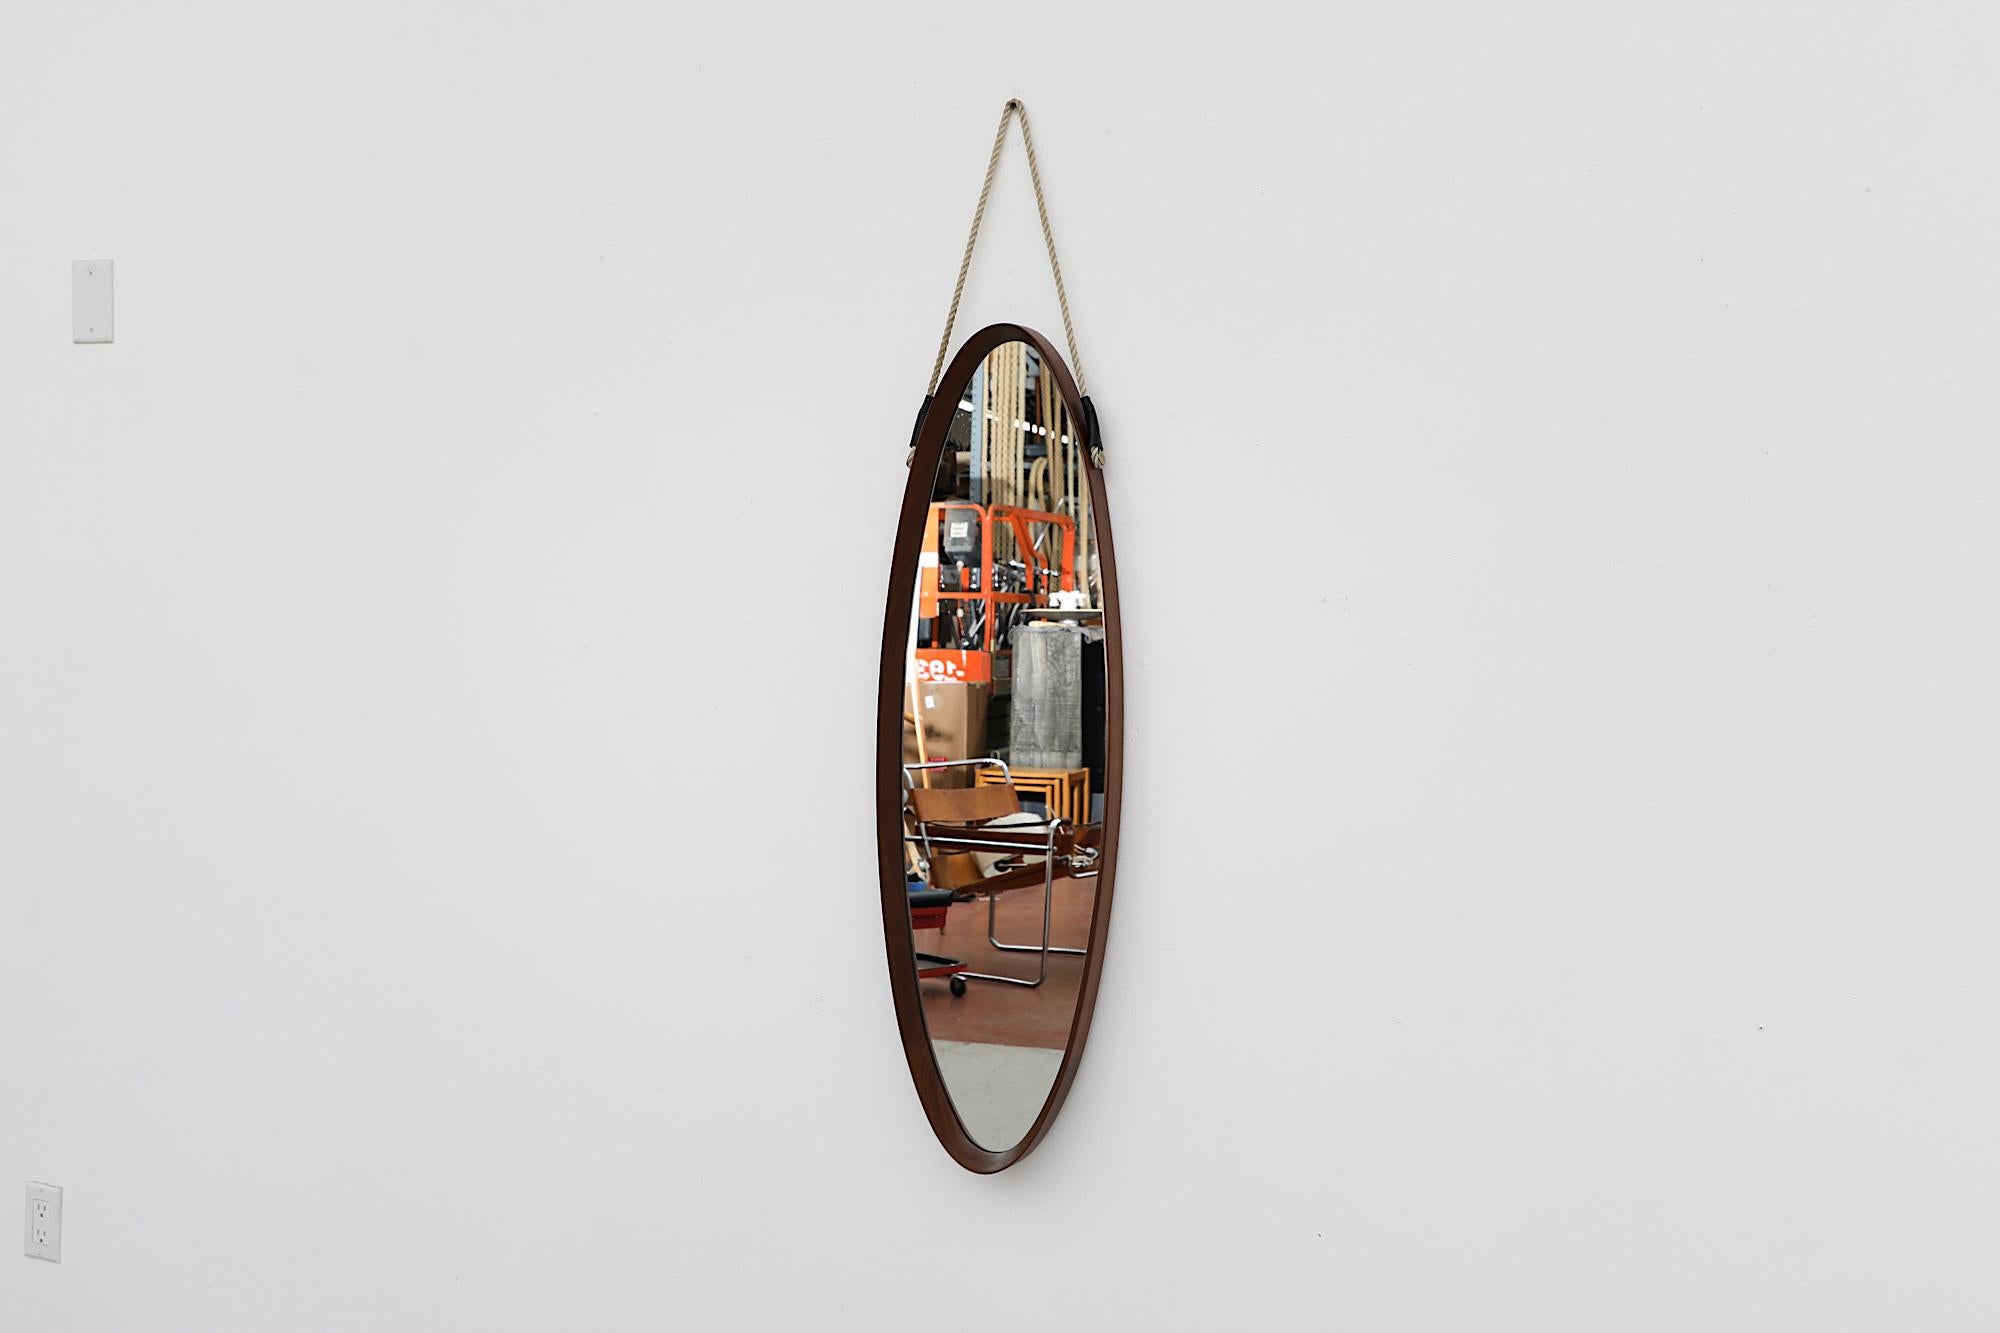 Italian Mid-Century long oval wall mounted mirror with heavy bent teak frame and rope strap. In original condition with visible wear consistent with its age and use. Other similar mirrors available and listed separately.